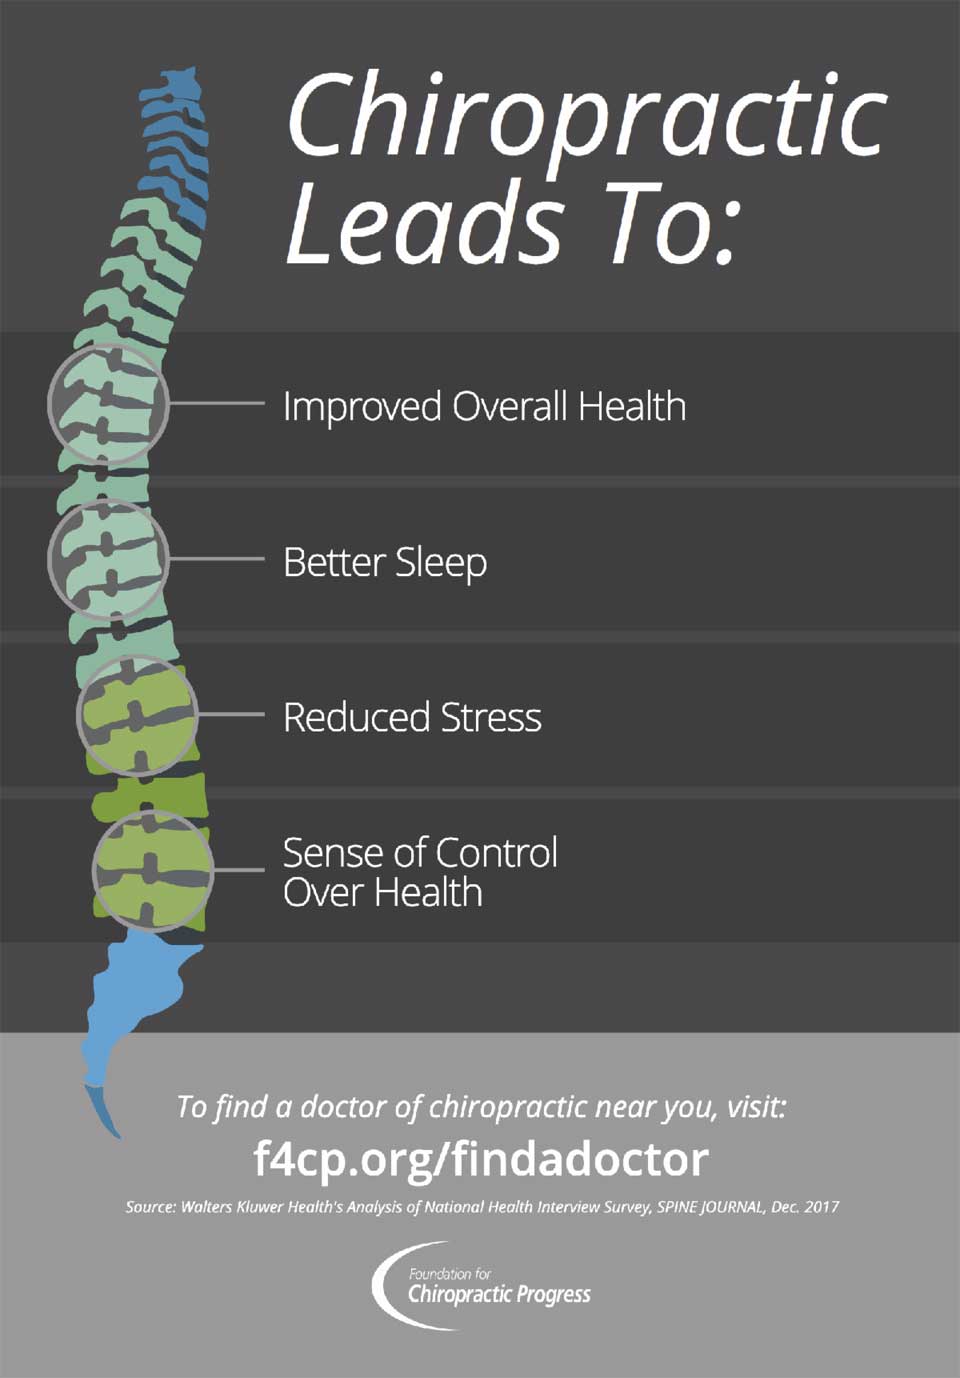 Chiropractic care leads to improved overall health